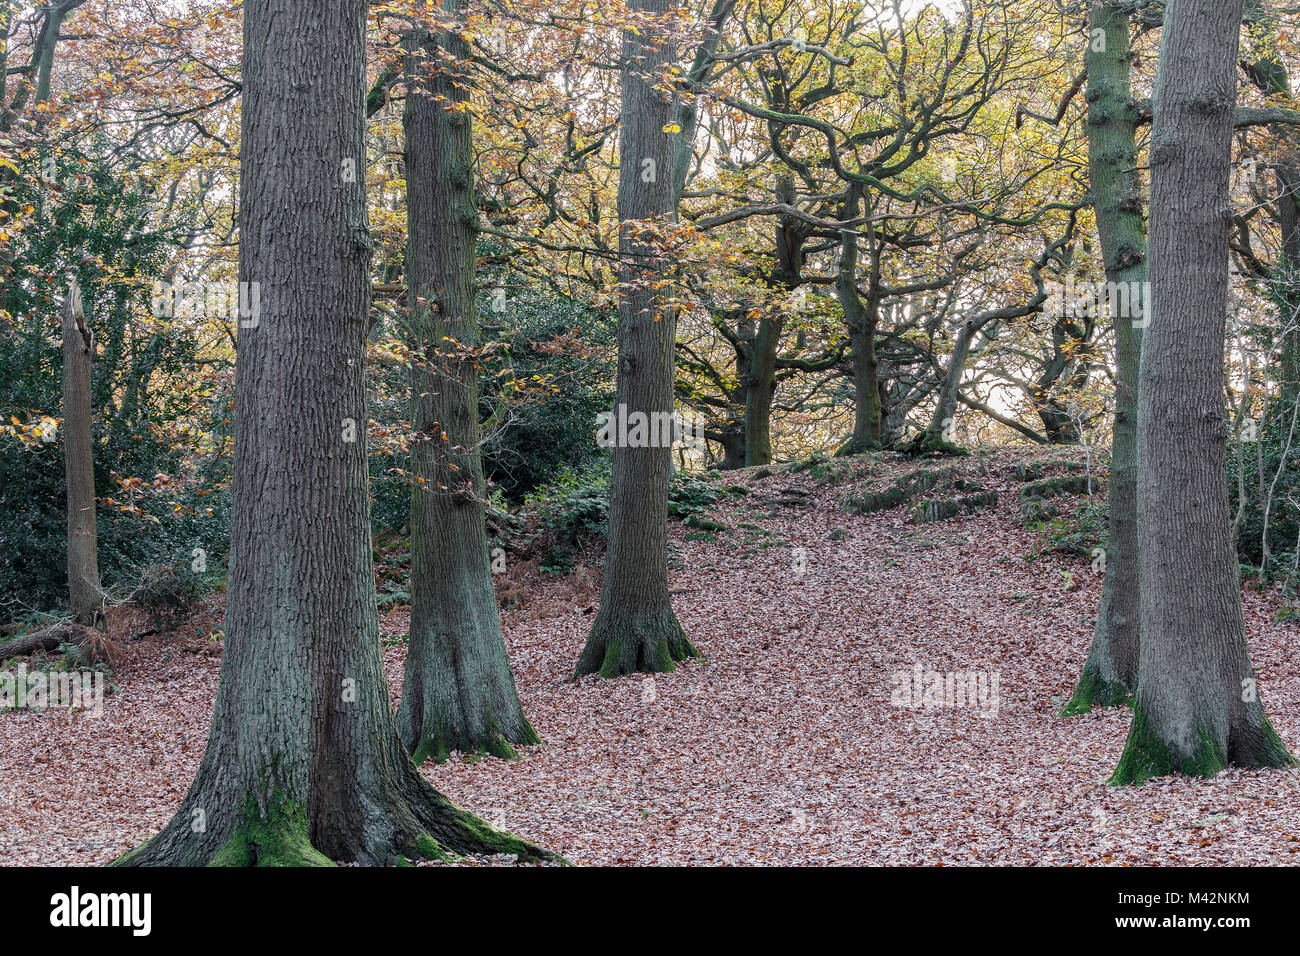 An image of woodland trees and a carpet of autumn leaves taken in the morning at Swithland Woods, Leicestershire, England, UK Stock Photo